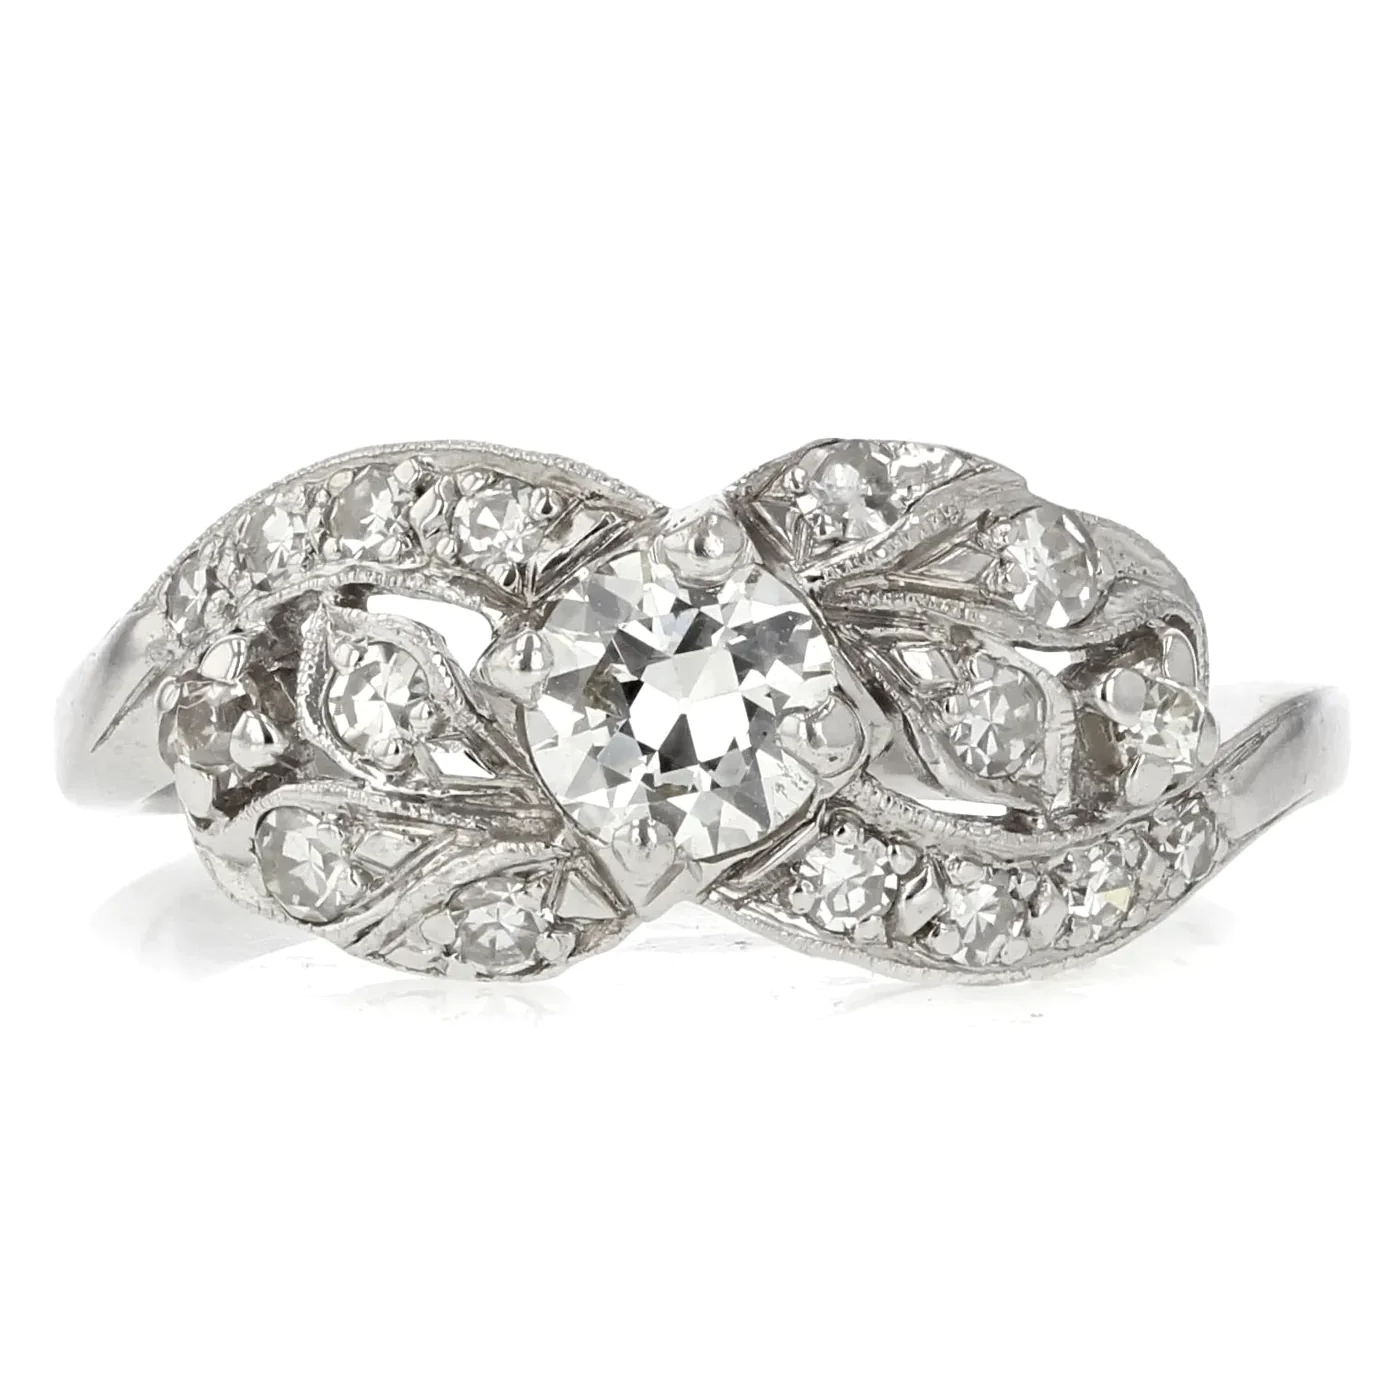 How to Propose with an Heirloom Engagement Ring | Schiffman's Jewelers